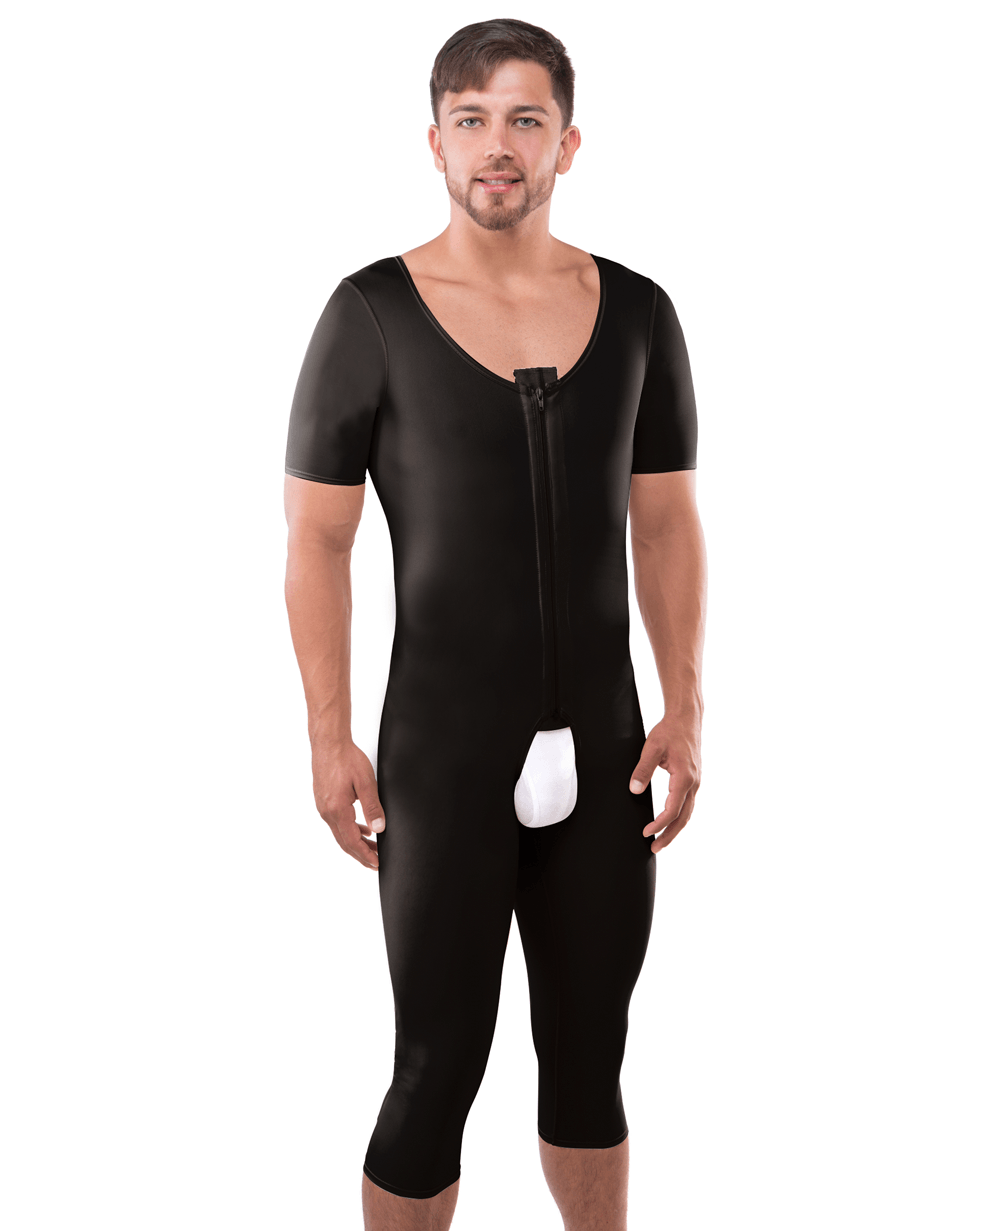 Why Are Compression Garments Required After Plastic Surgery?